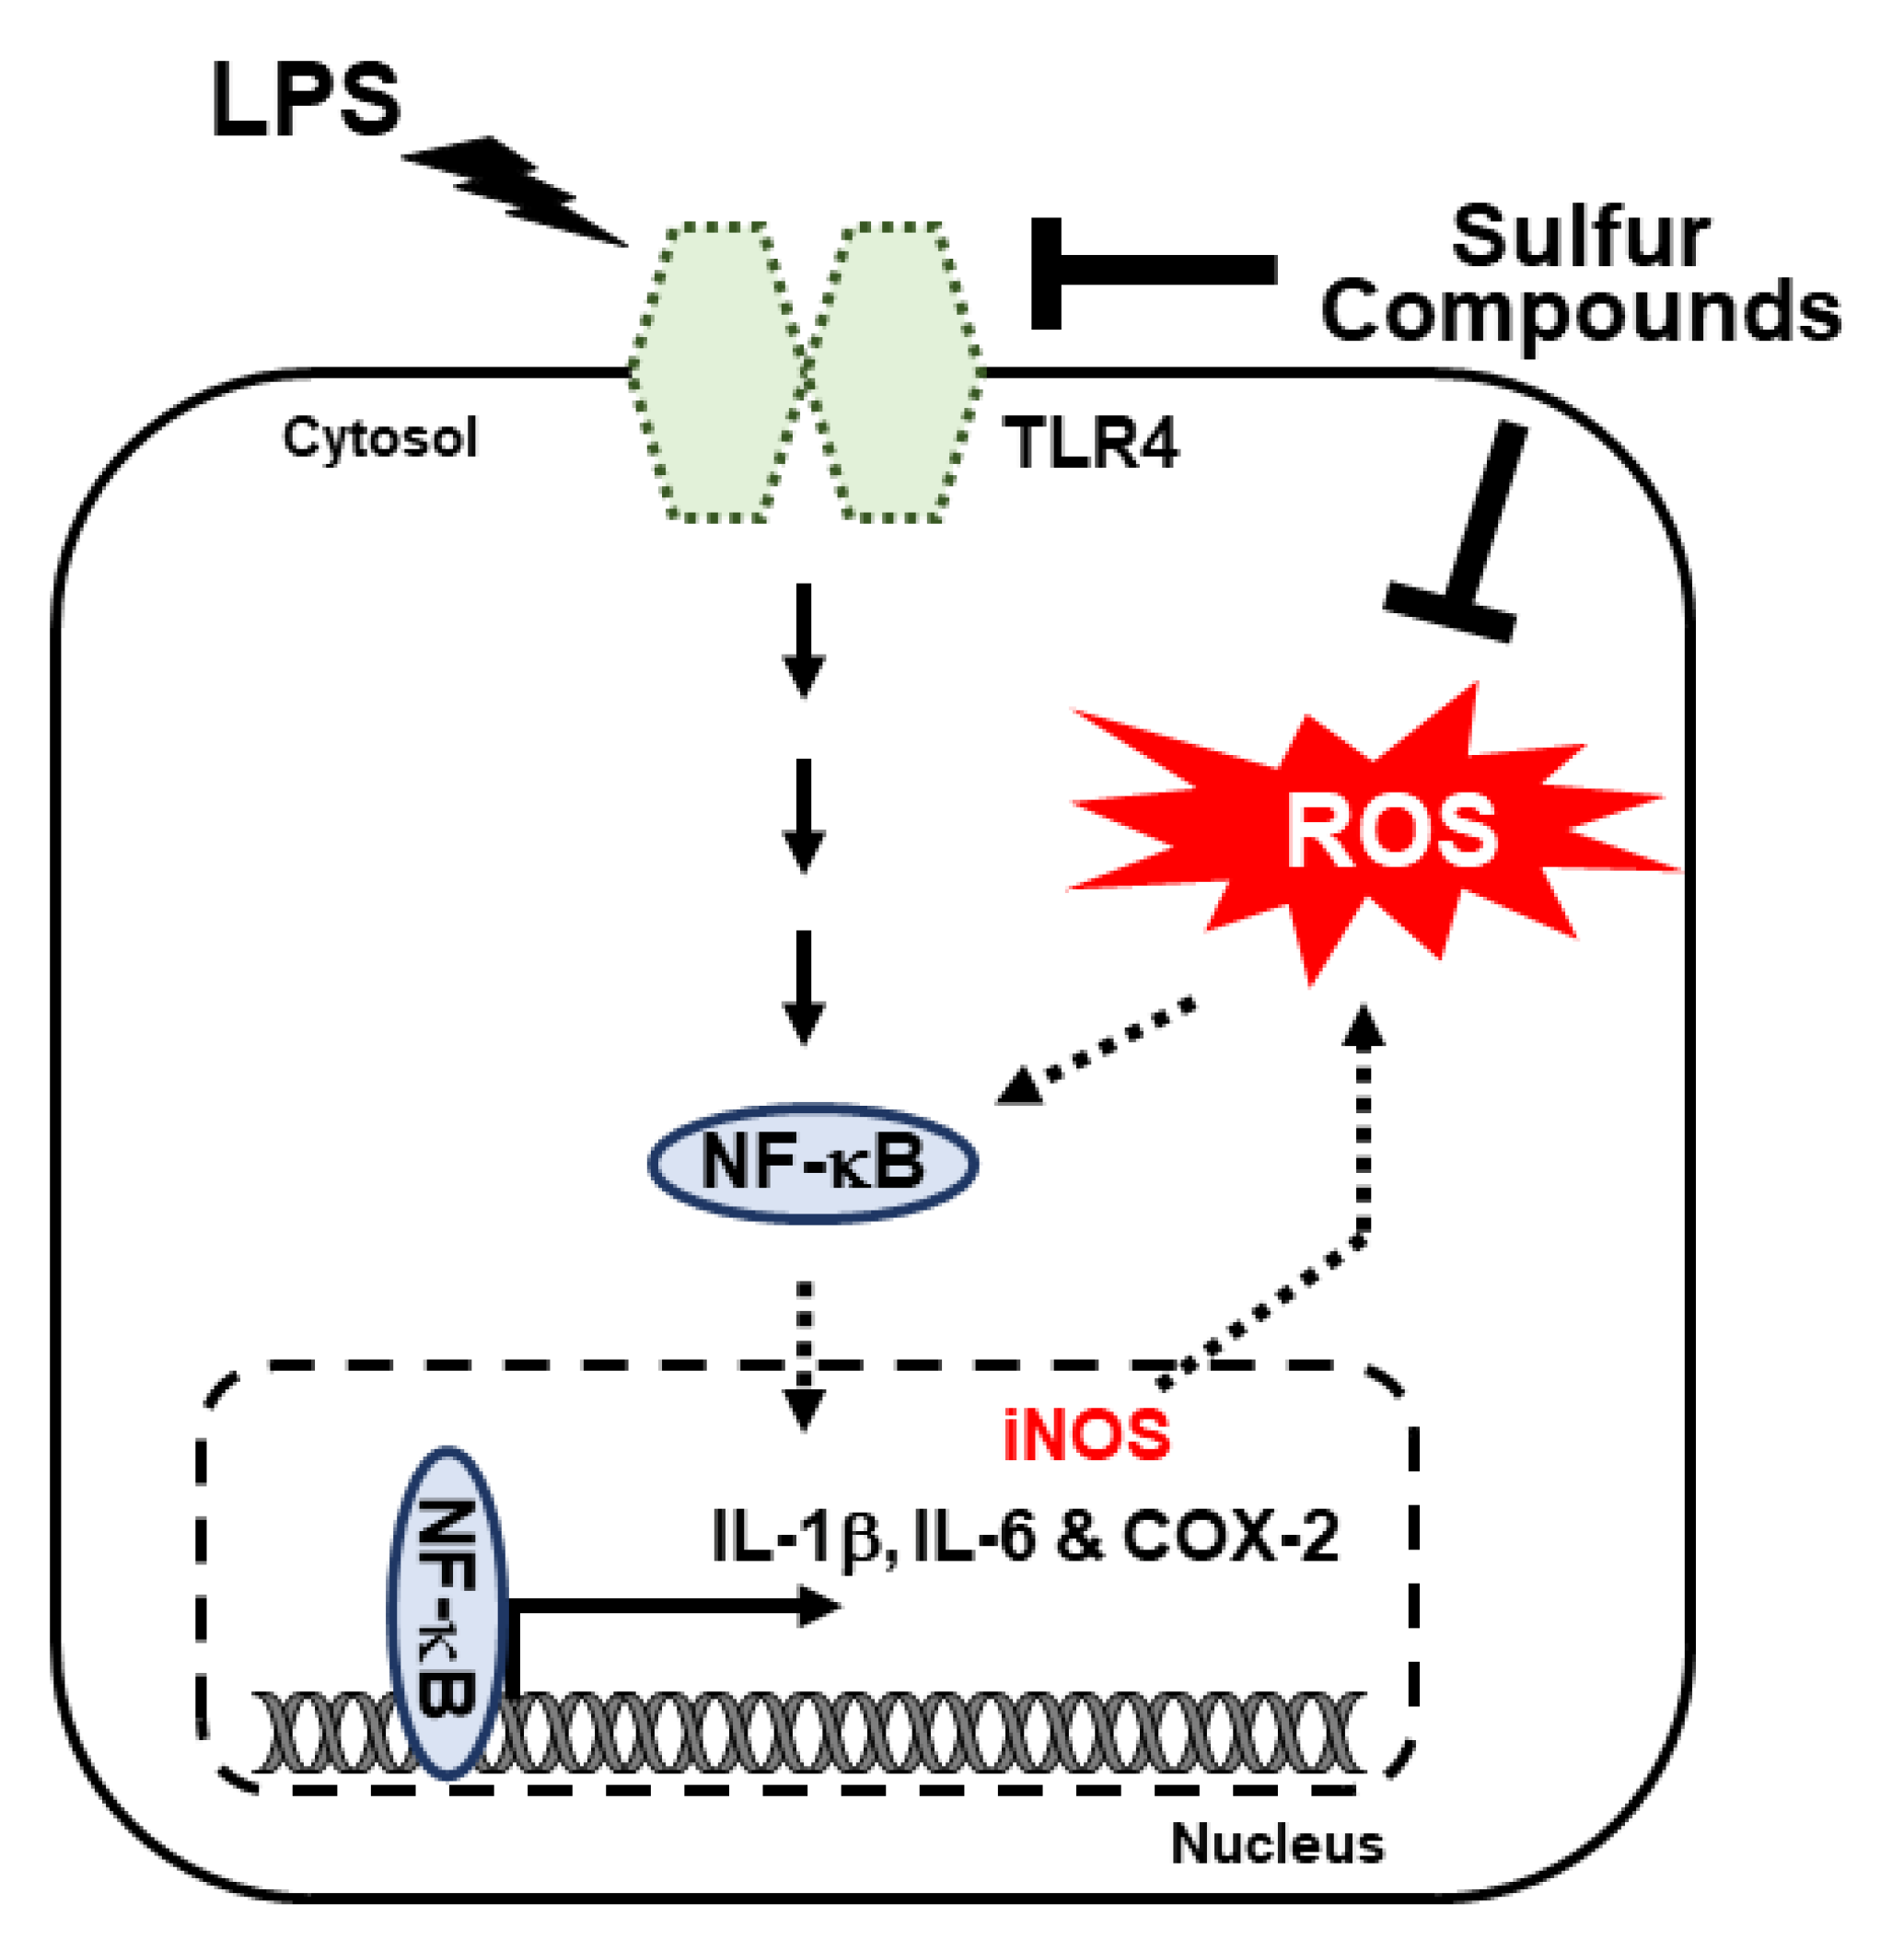 Life | Free Full-Text | Natural Sulfurs Inhibit LPS-Induced Inflammatory  Responses through NF-κB Signaling in CCD-986Sk Skin Fibroblasts